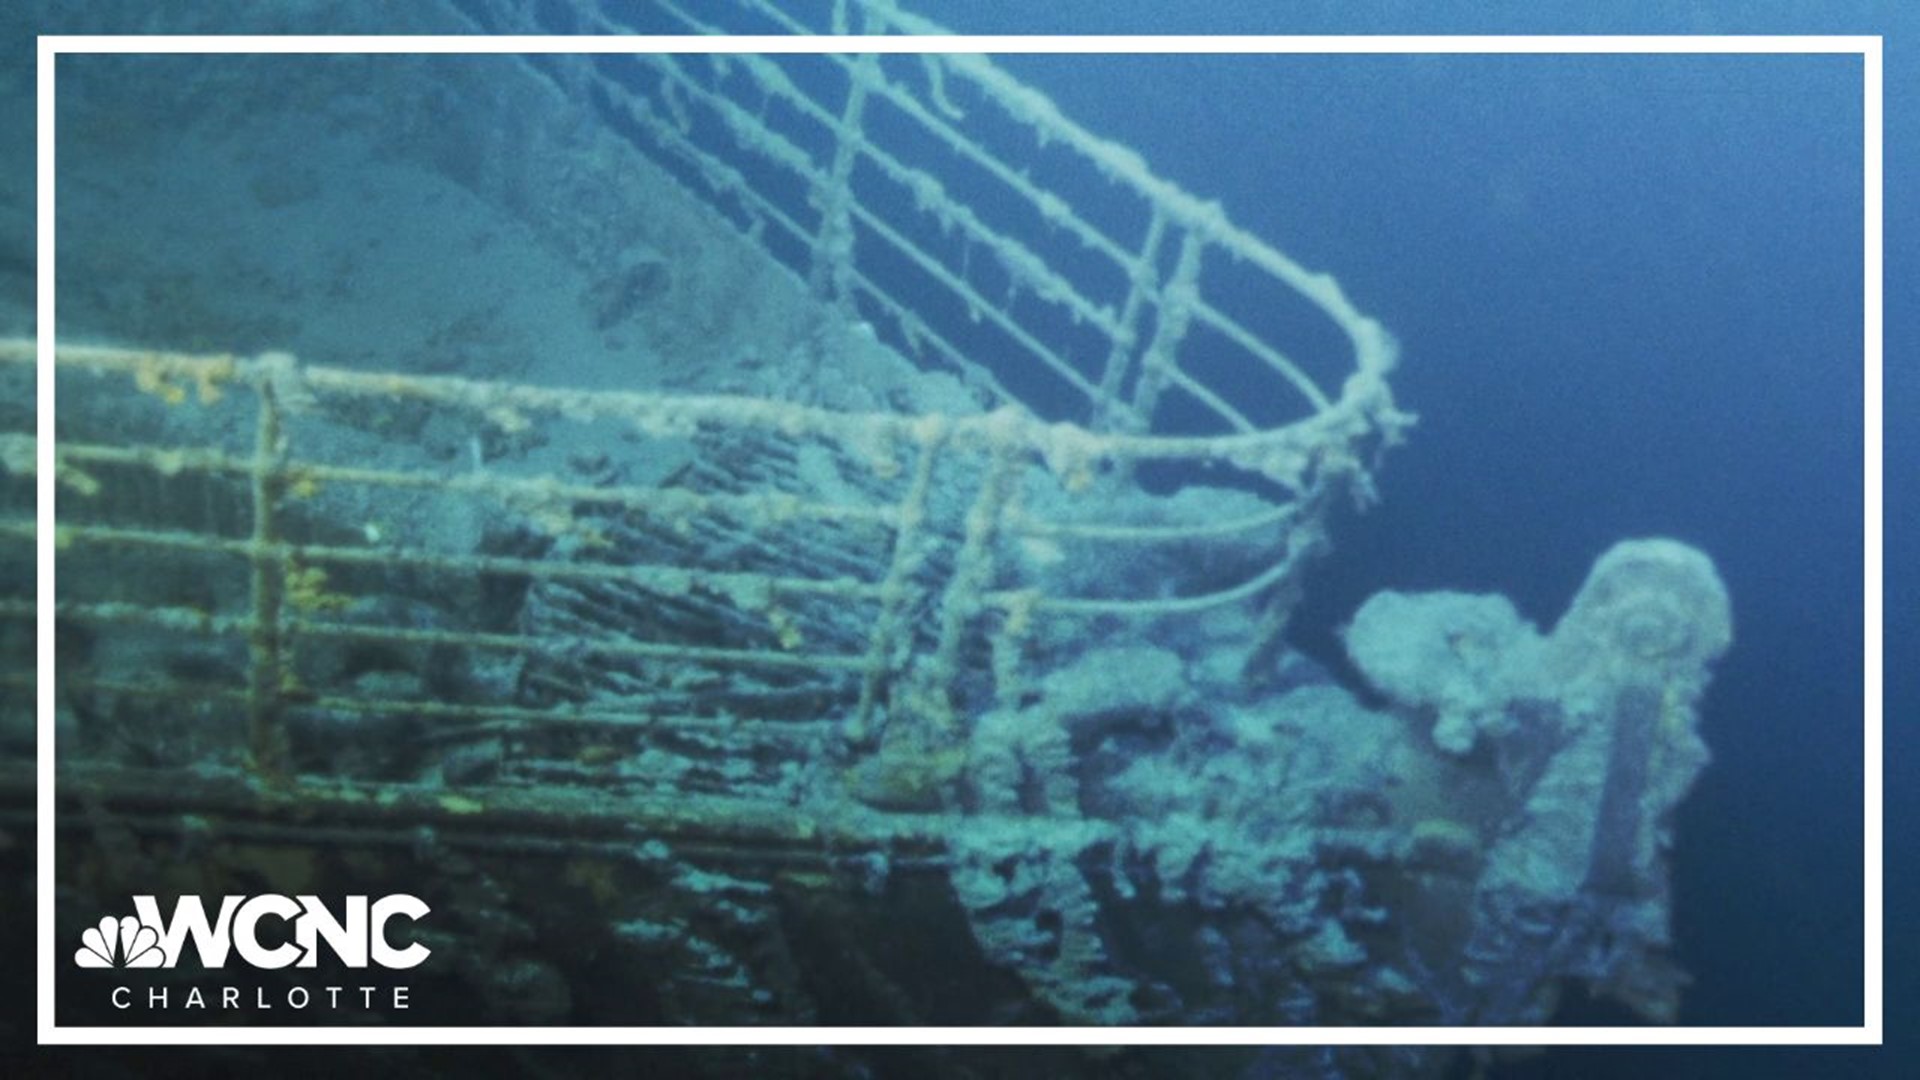 The U.S. government is trying to stop a planned expedition to recover items from the sunken Titanic, citing a federal law and international agreement.